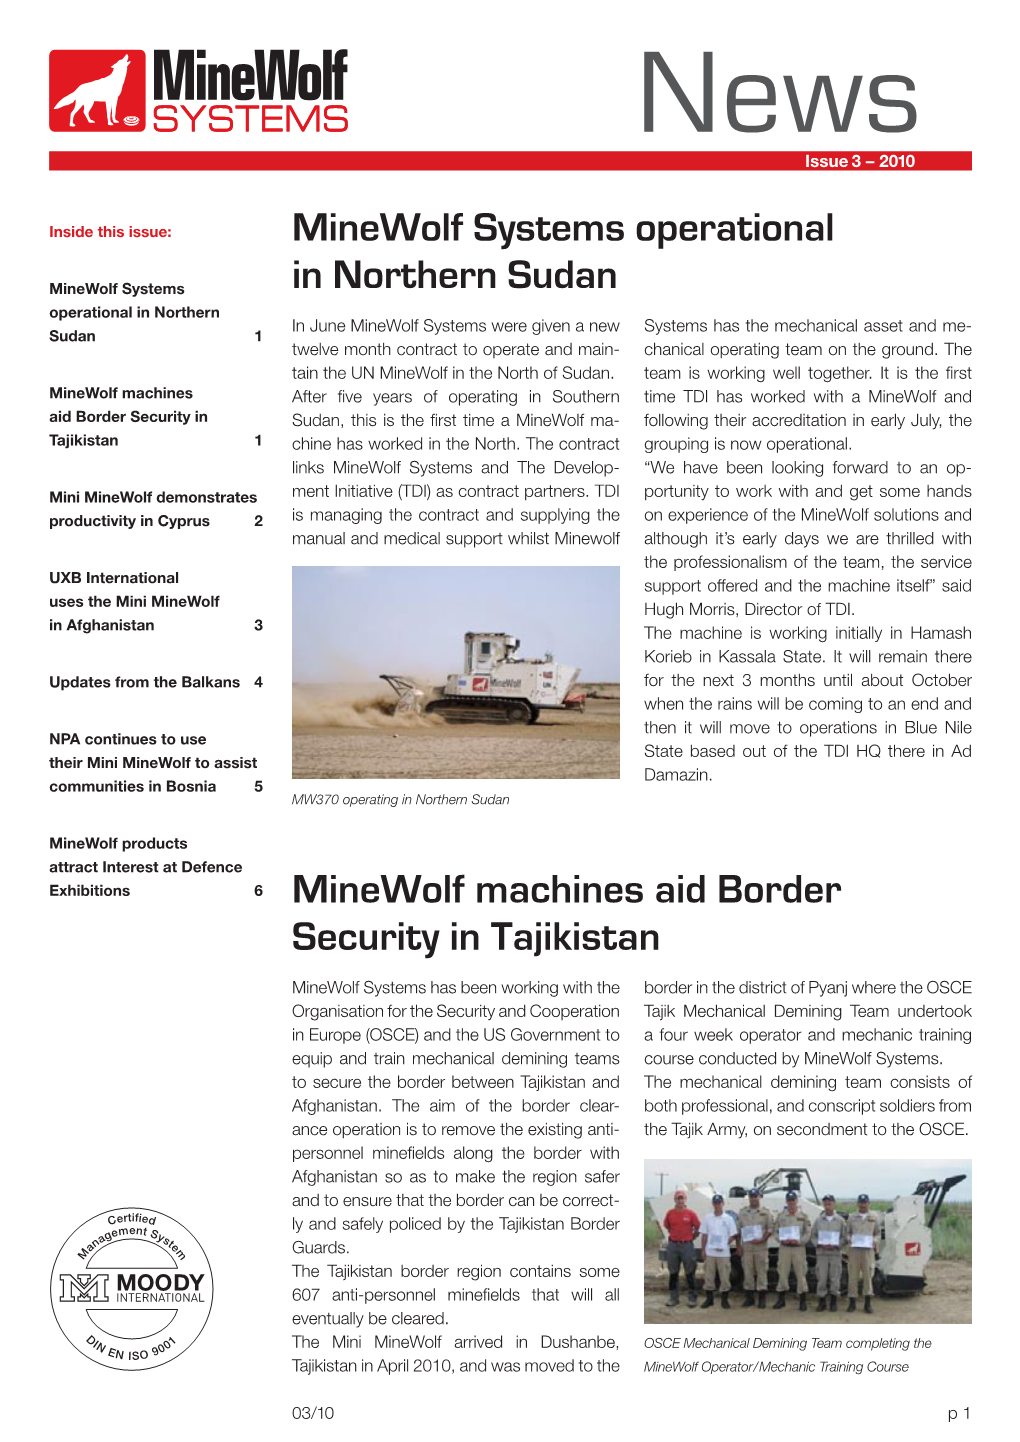 UXB International Uses the Mini Minewolf in Afghanistan by Chris Thompson, Mechanical Demining Manager, UXB International, Bagram Airforce Base, Afghanistan